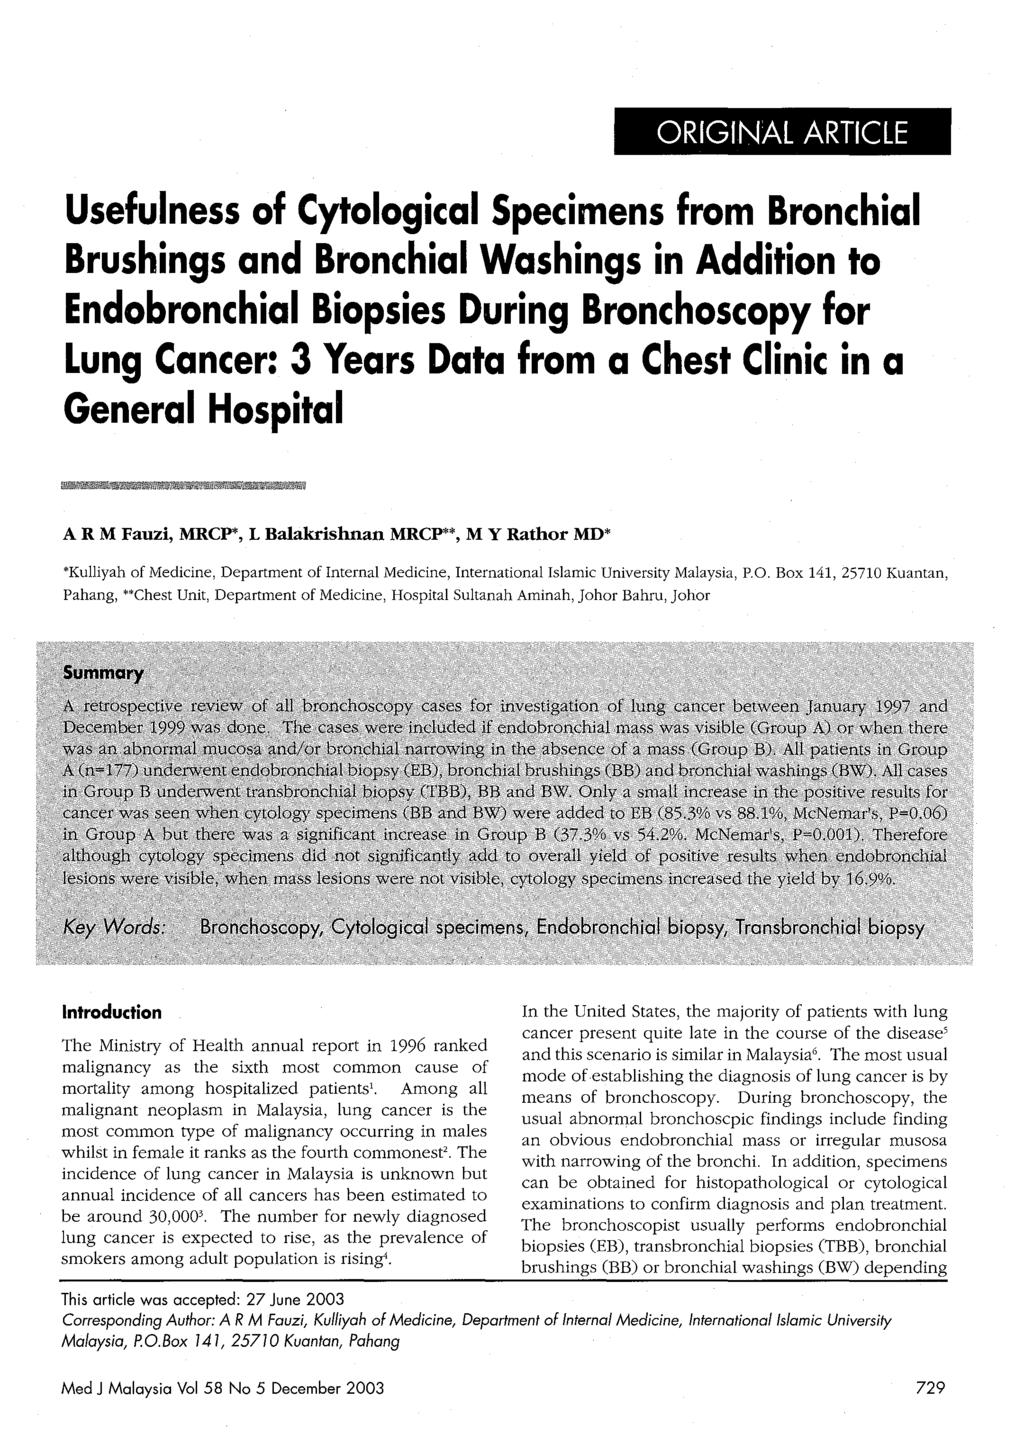 ORIGINAL ARTICLE Usefulness of Cytological Specimens from Bronchial Brushings and Bronchial Washings in Addition to Endobronchial Biopsies During Bronchoscopy for Lung Cancer: 3 Years Data from a